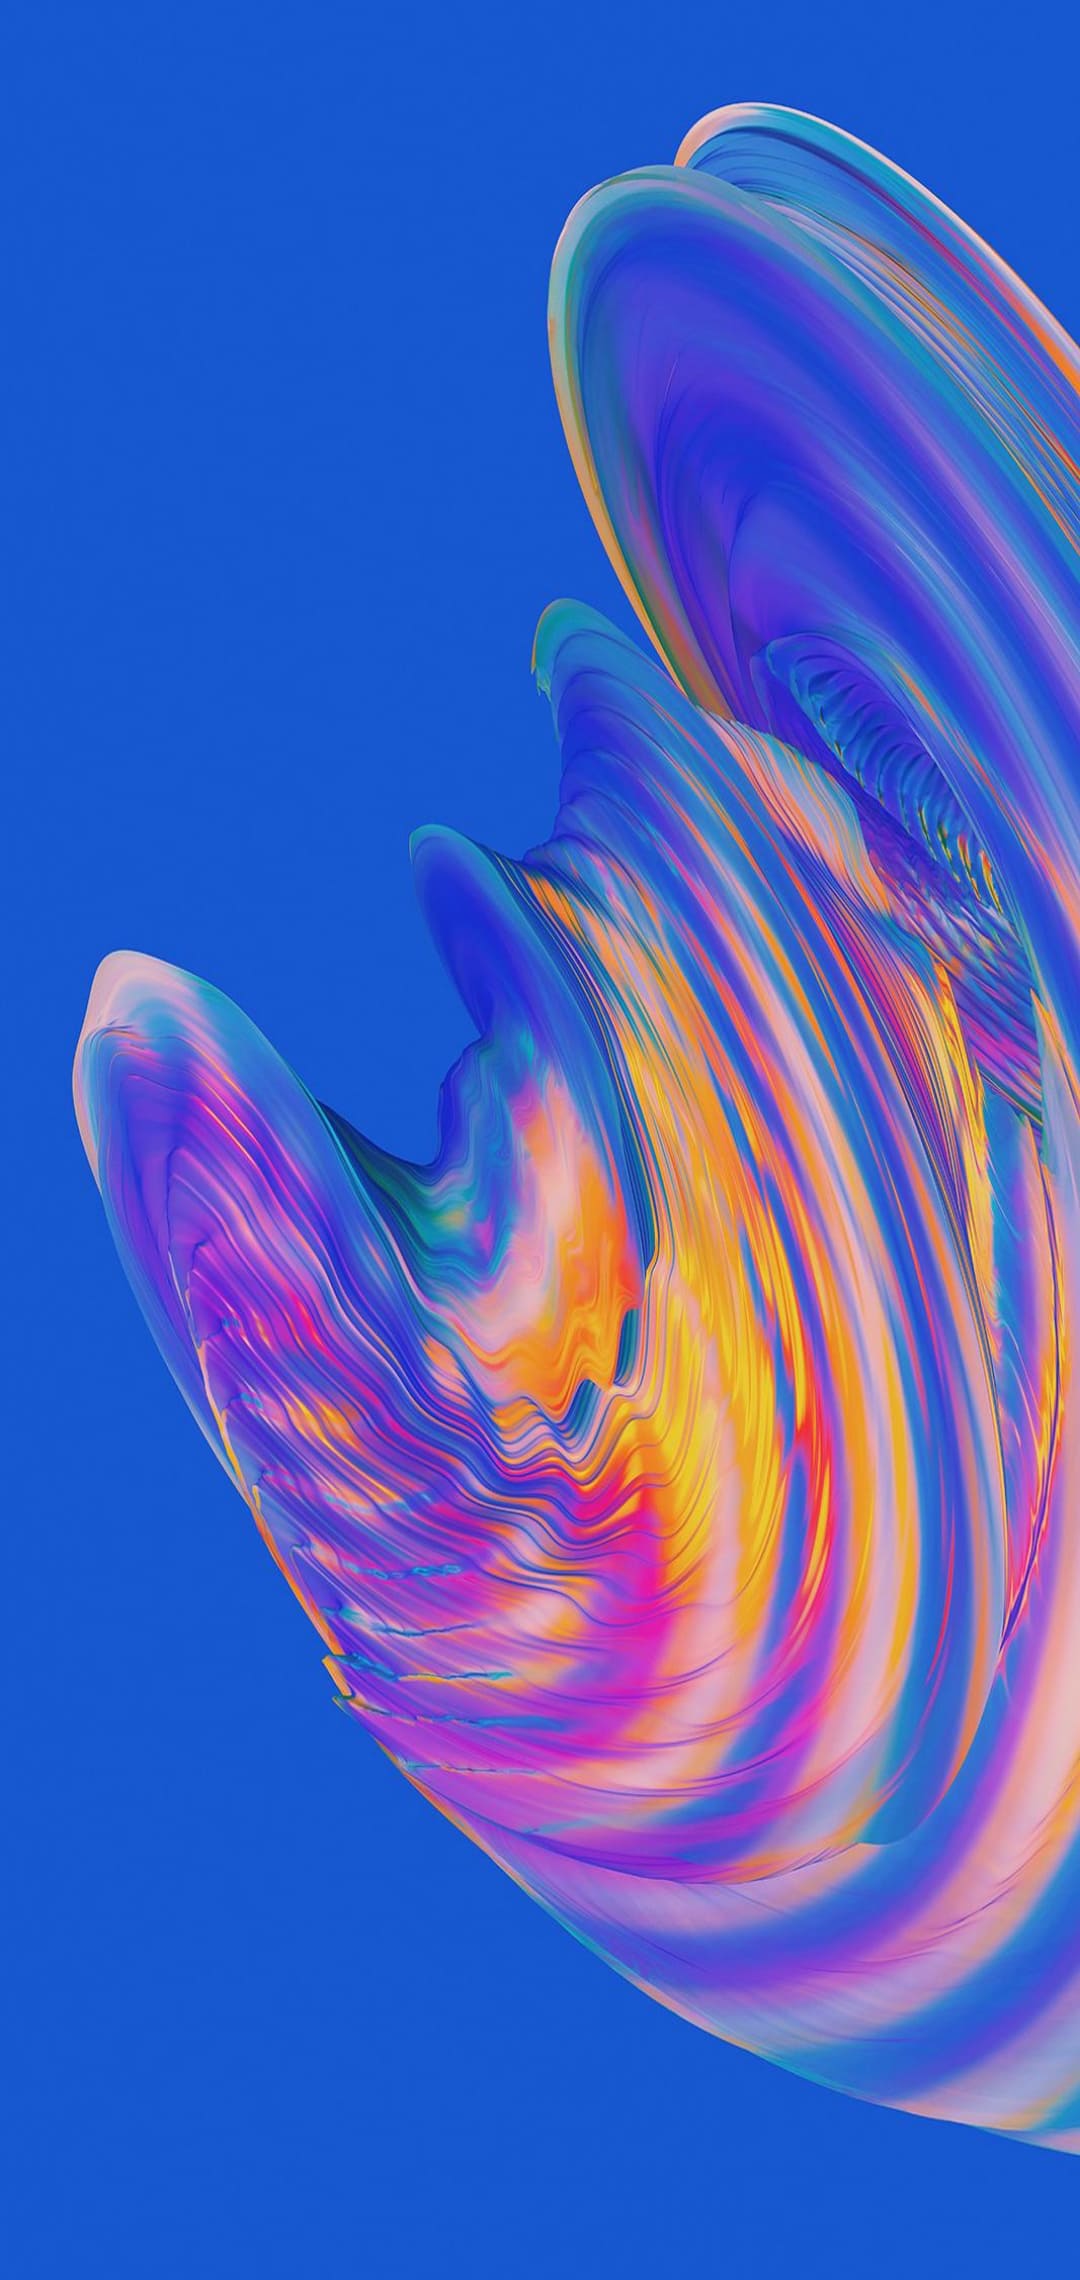 full hd wallpaper for android,purple,water,vortex,organism,pattern